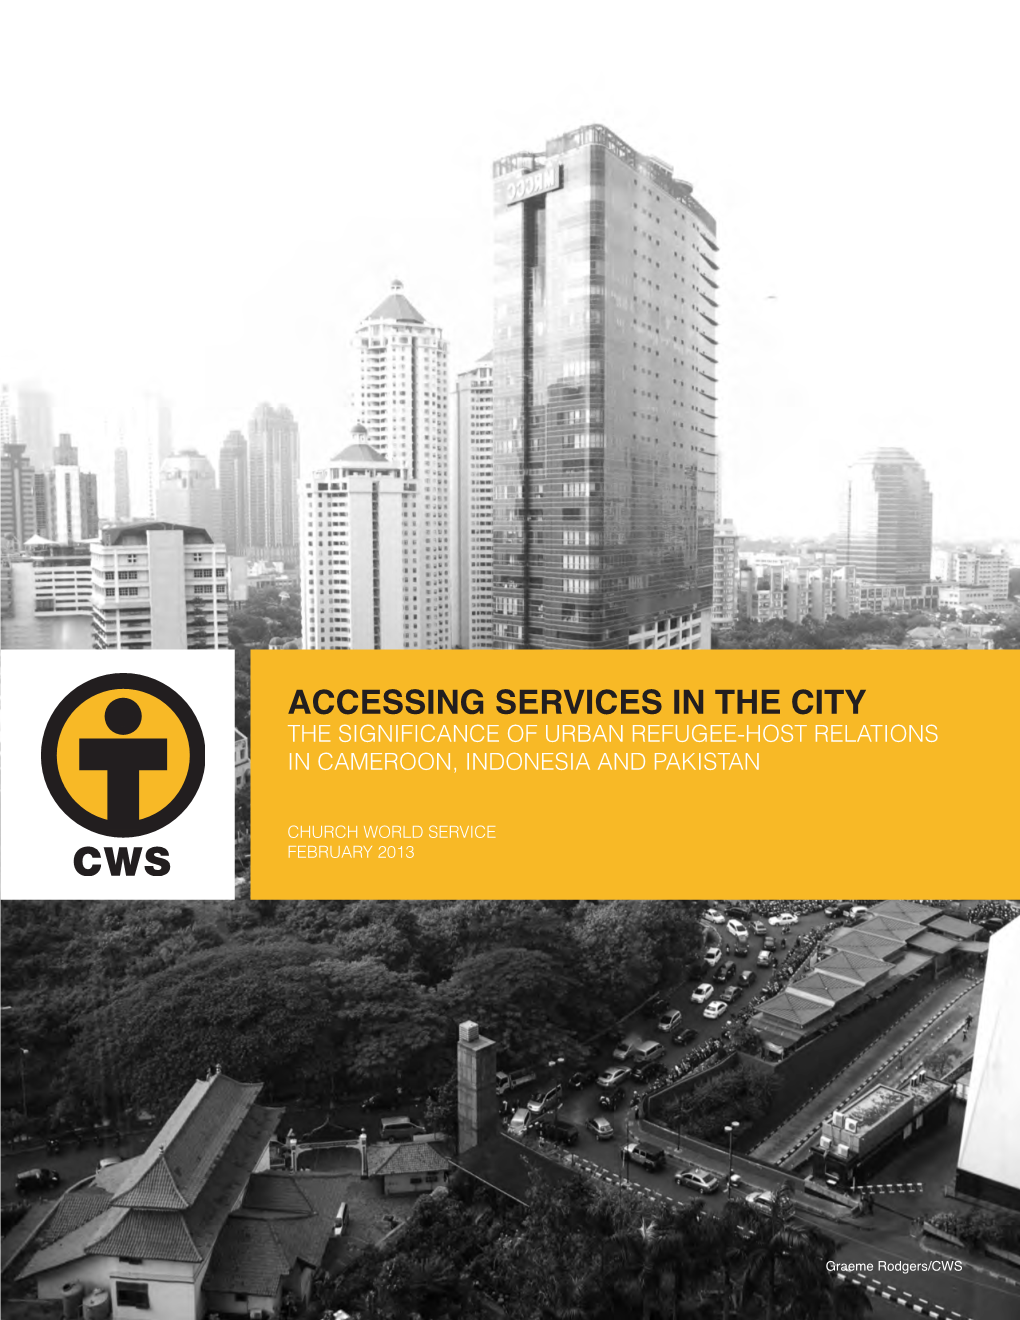 Accessing Services in the City the Significance of Urban Refugee-Host Relations in Cameroon, Indonesia and Pakistan